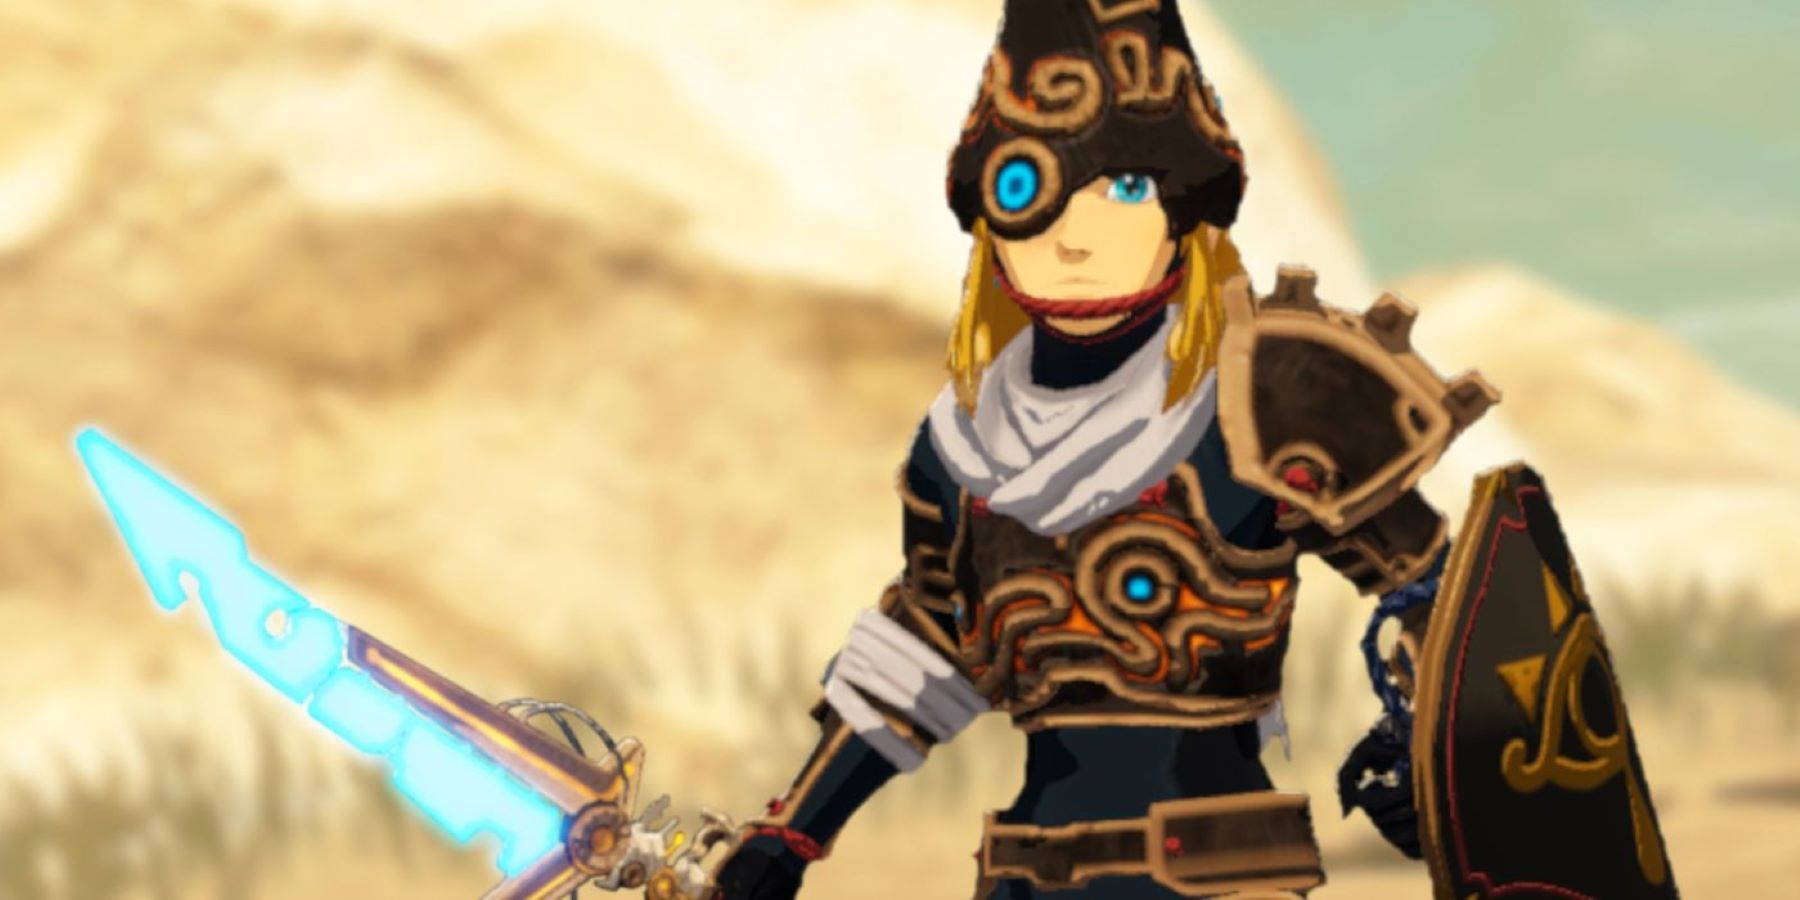 Link wearing the Ancient Armor set in Hyrule Warriors: Age of Calamity